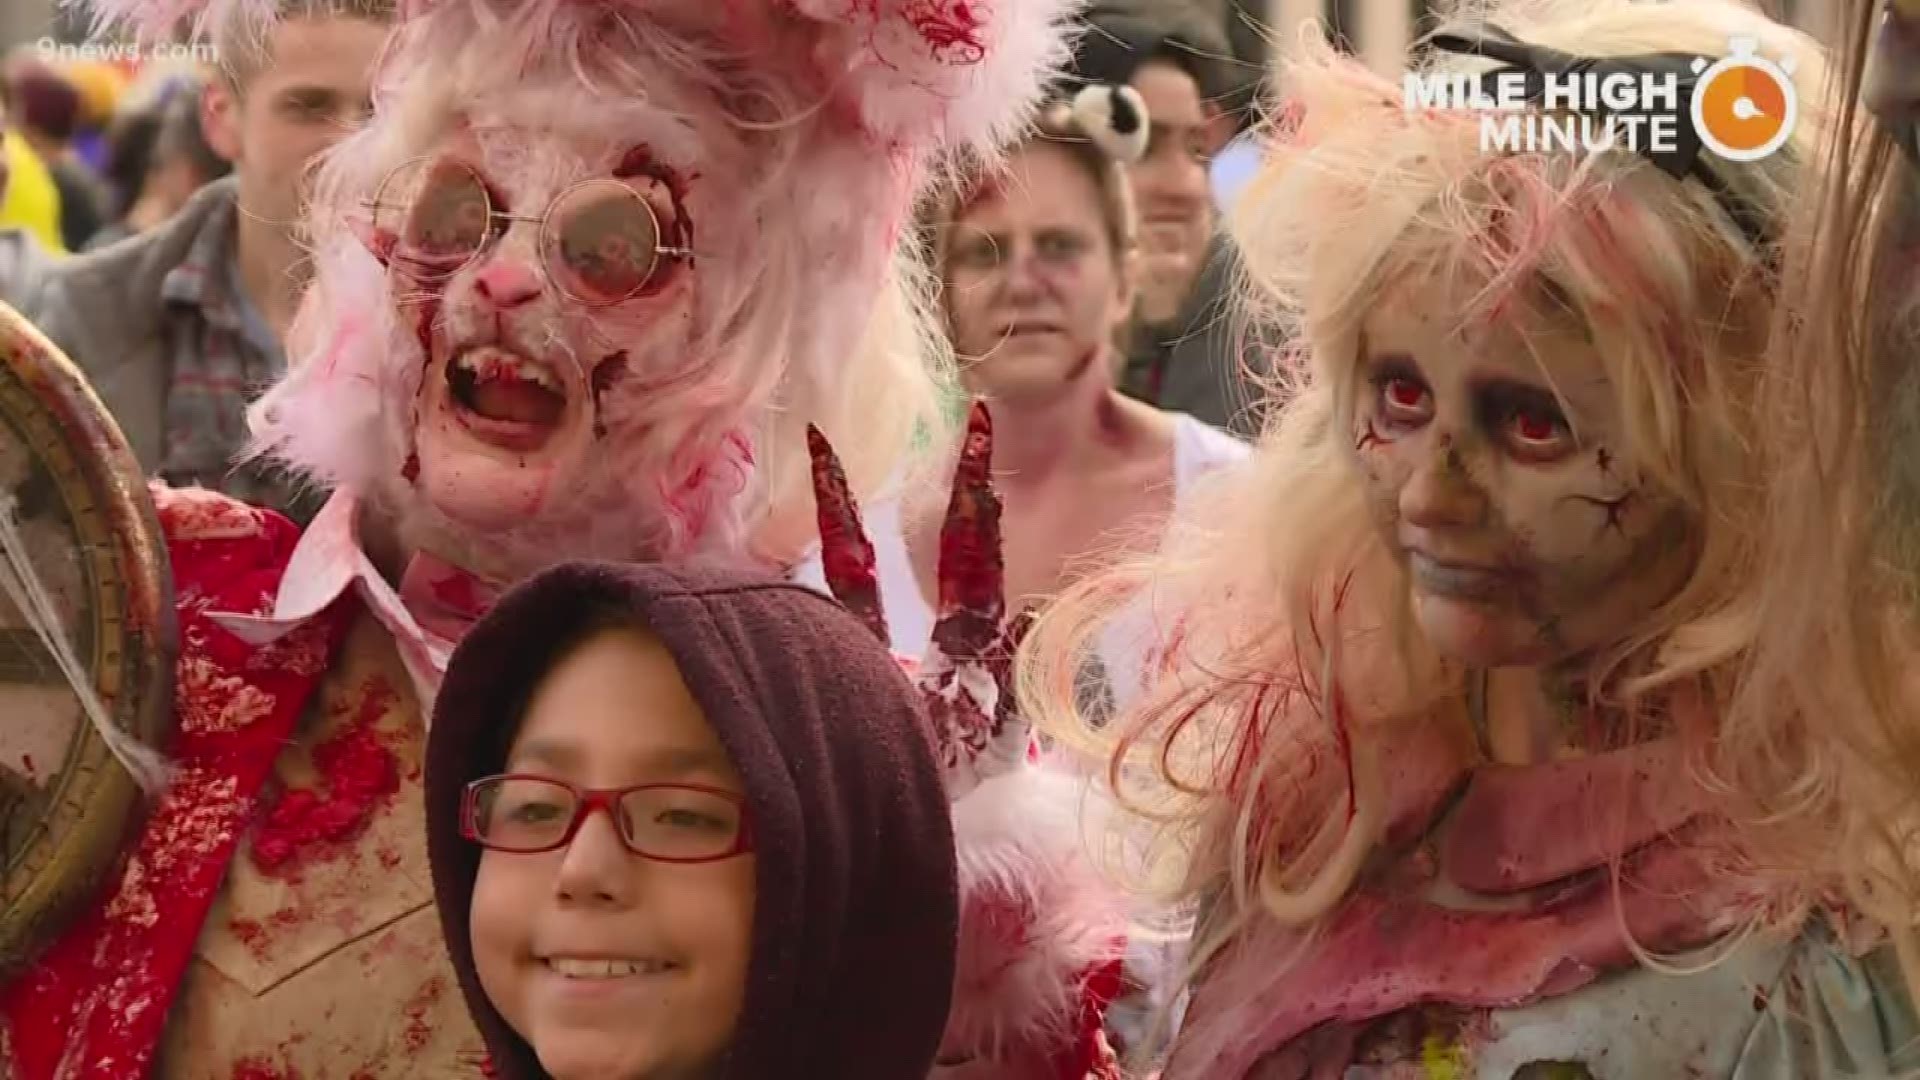 9NEWS's Eddie Randle takes us through the Zombie Crawl taking over downtown Denver this weekend.